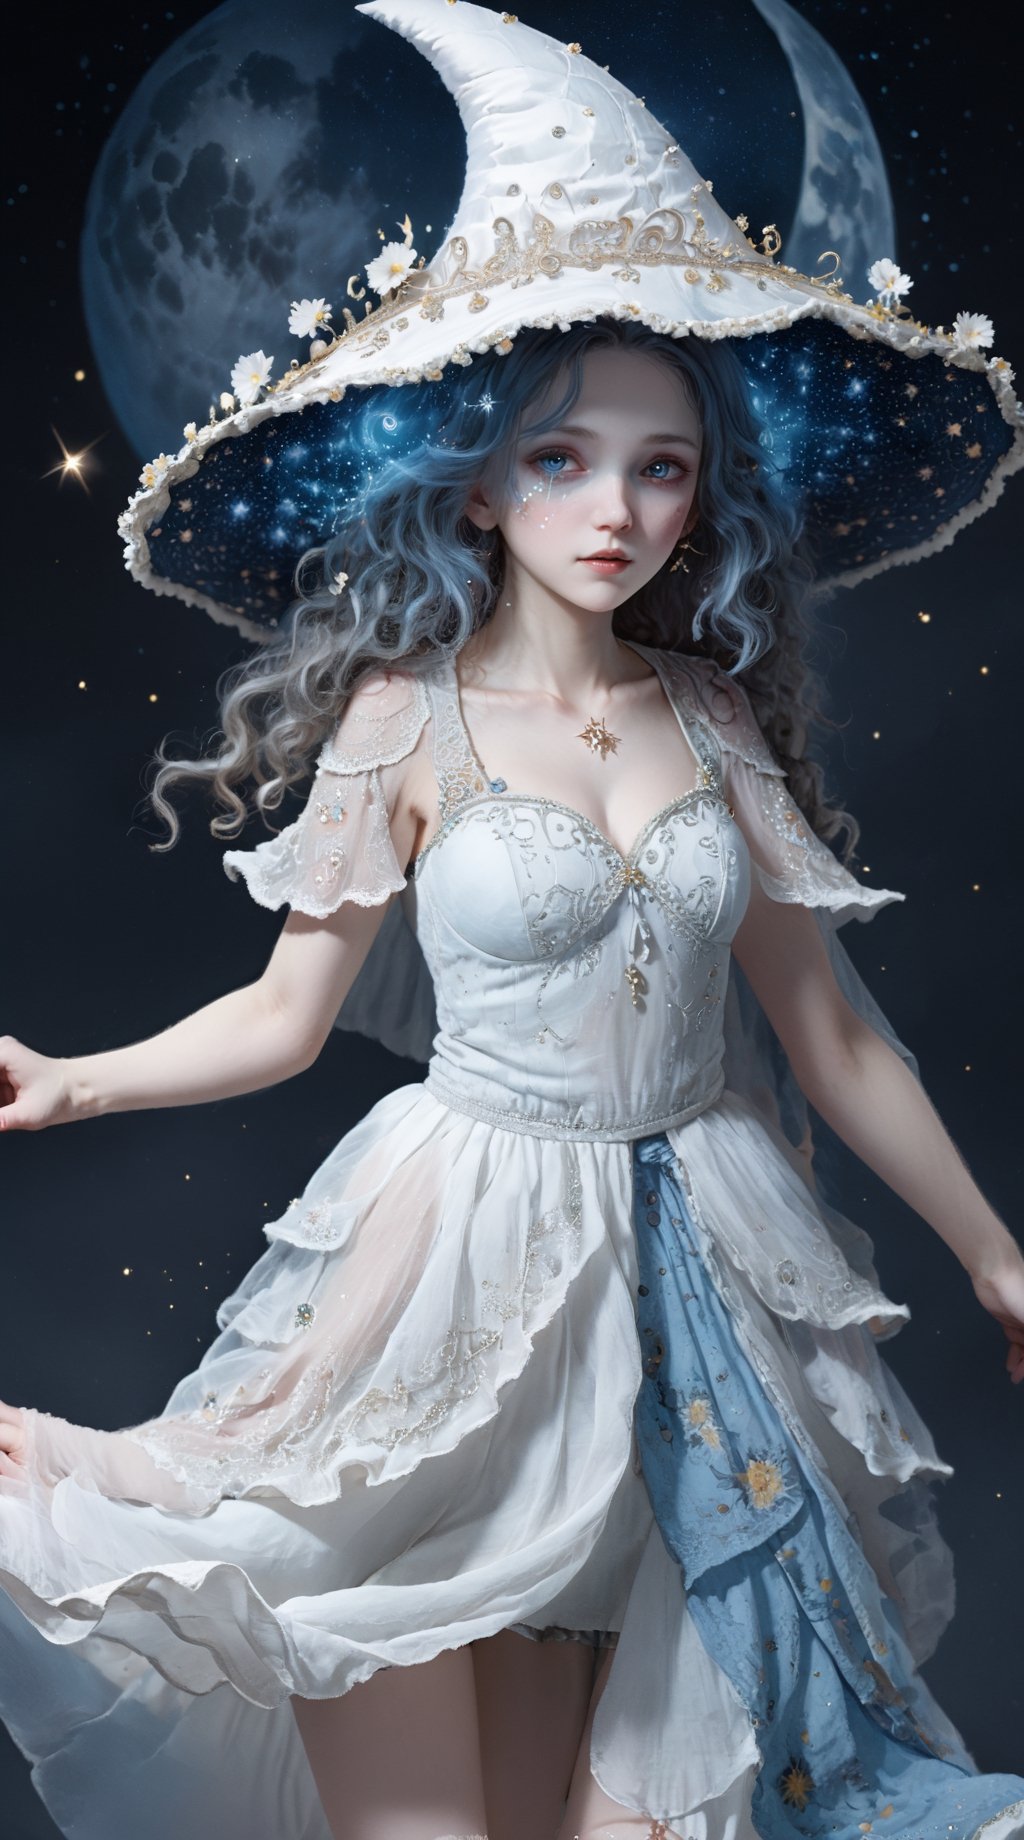 IncrsXLRanni, Fantasy, surreal, 1girl, dynamic pose, (blue skin:1.4), flow curly hair, white dress is made of a soft and silky fabric, flows on the body, grey&white color, sweetheart neckline, a flared skirt reaches the floor, adorned skirt by intricate embellishments of floral patterns, stars, and crescent moons, (doll joints), Made of beads, sequins, crystals, and pearls that sparkling), has a veil and hat which also has floral, star, and moon motifs that complement the dress. Accesorized dress, Combination of fashionable and fantasy, creative, Hyperdetailed artwork,IncrsXLRanni,wavy hair, blue skin, cracked skin,girl